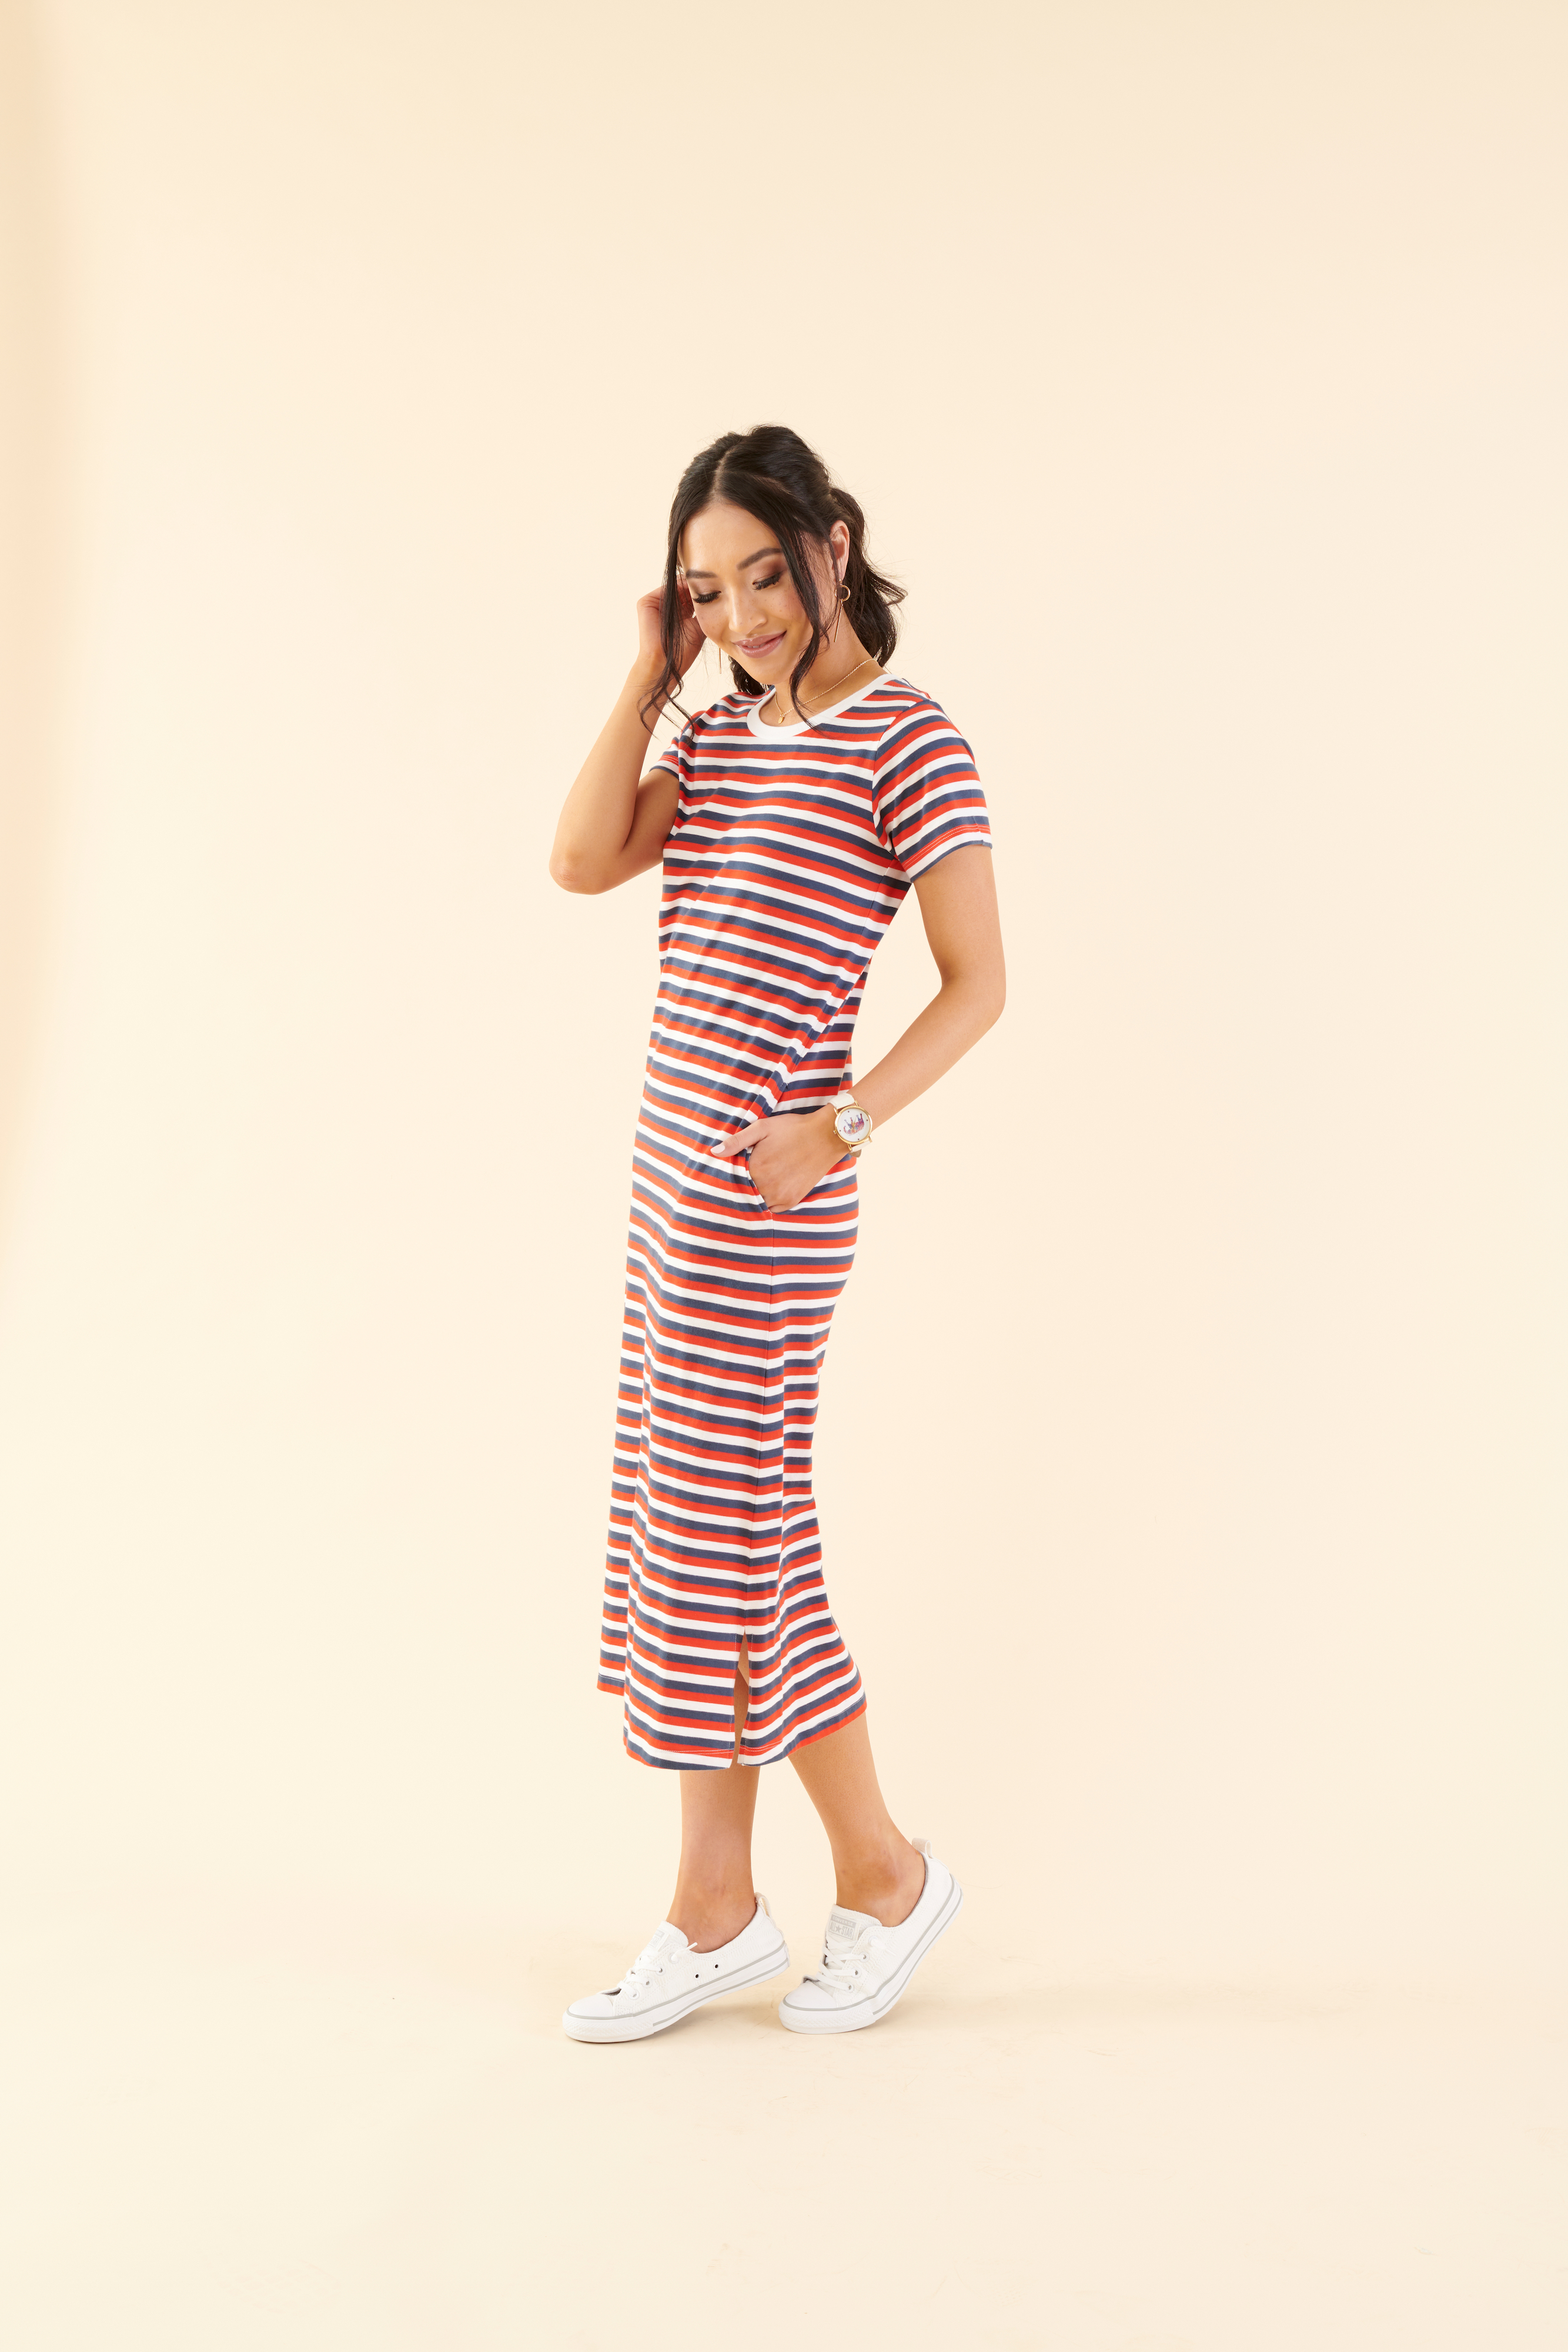 5 Outfits for the 4th of July and Pioneer Day